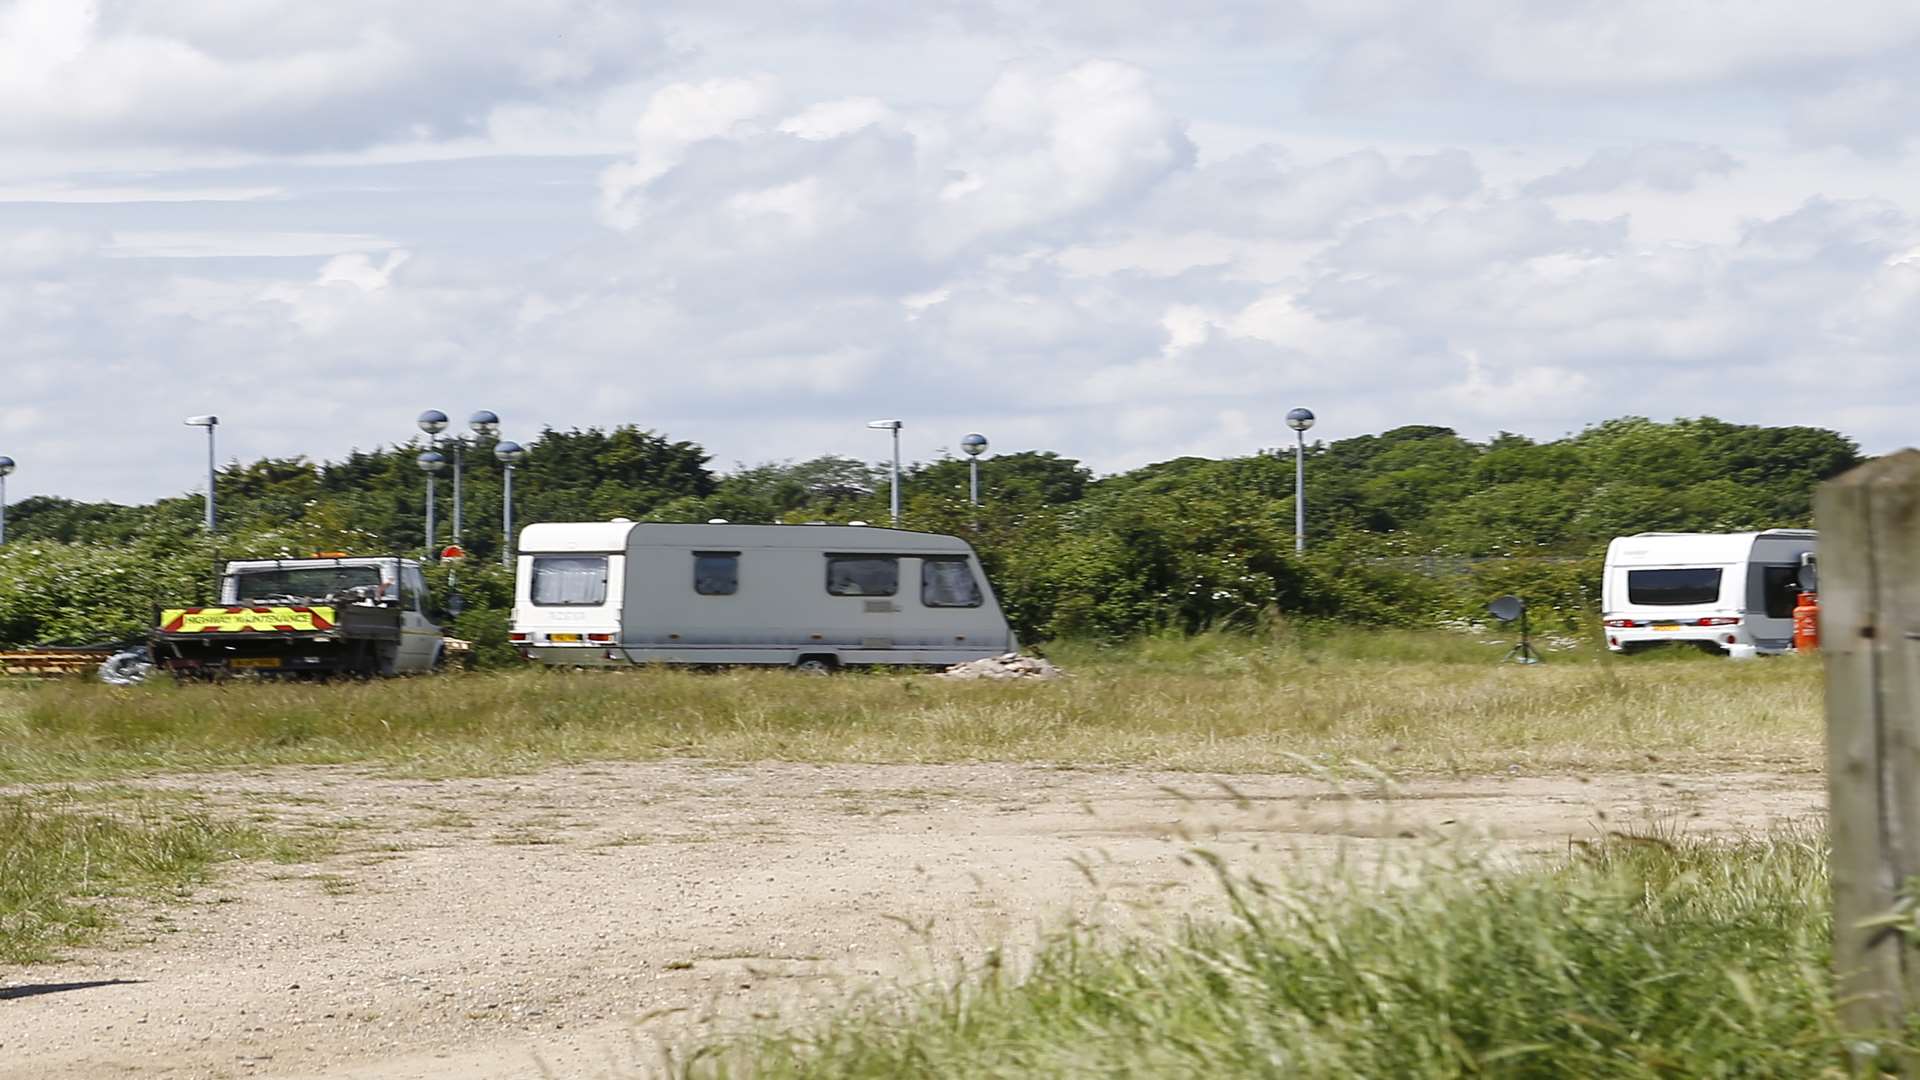 Travellers are occupying a site due to host Santus Circus